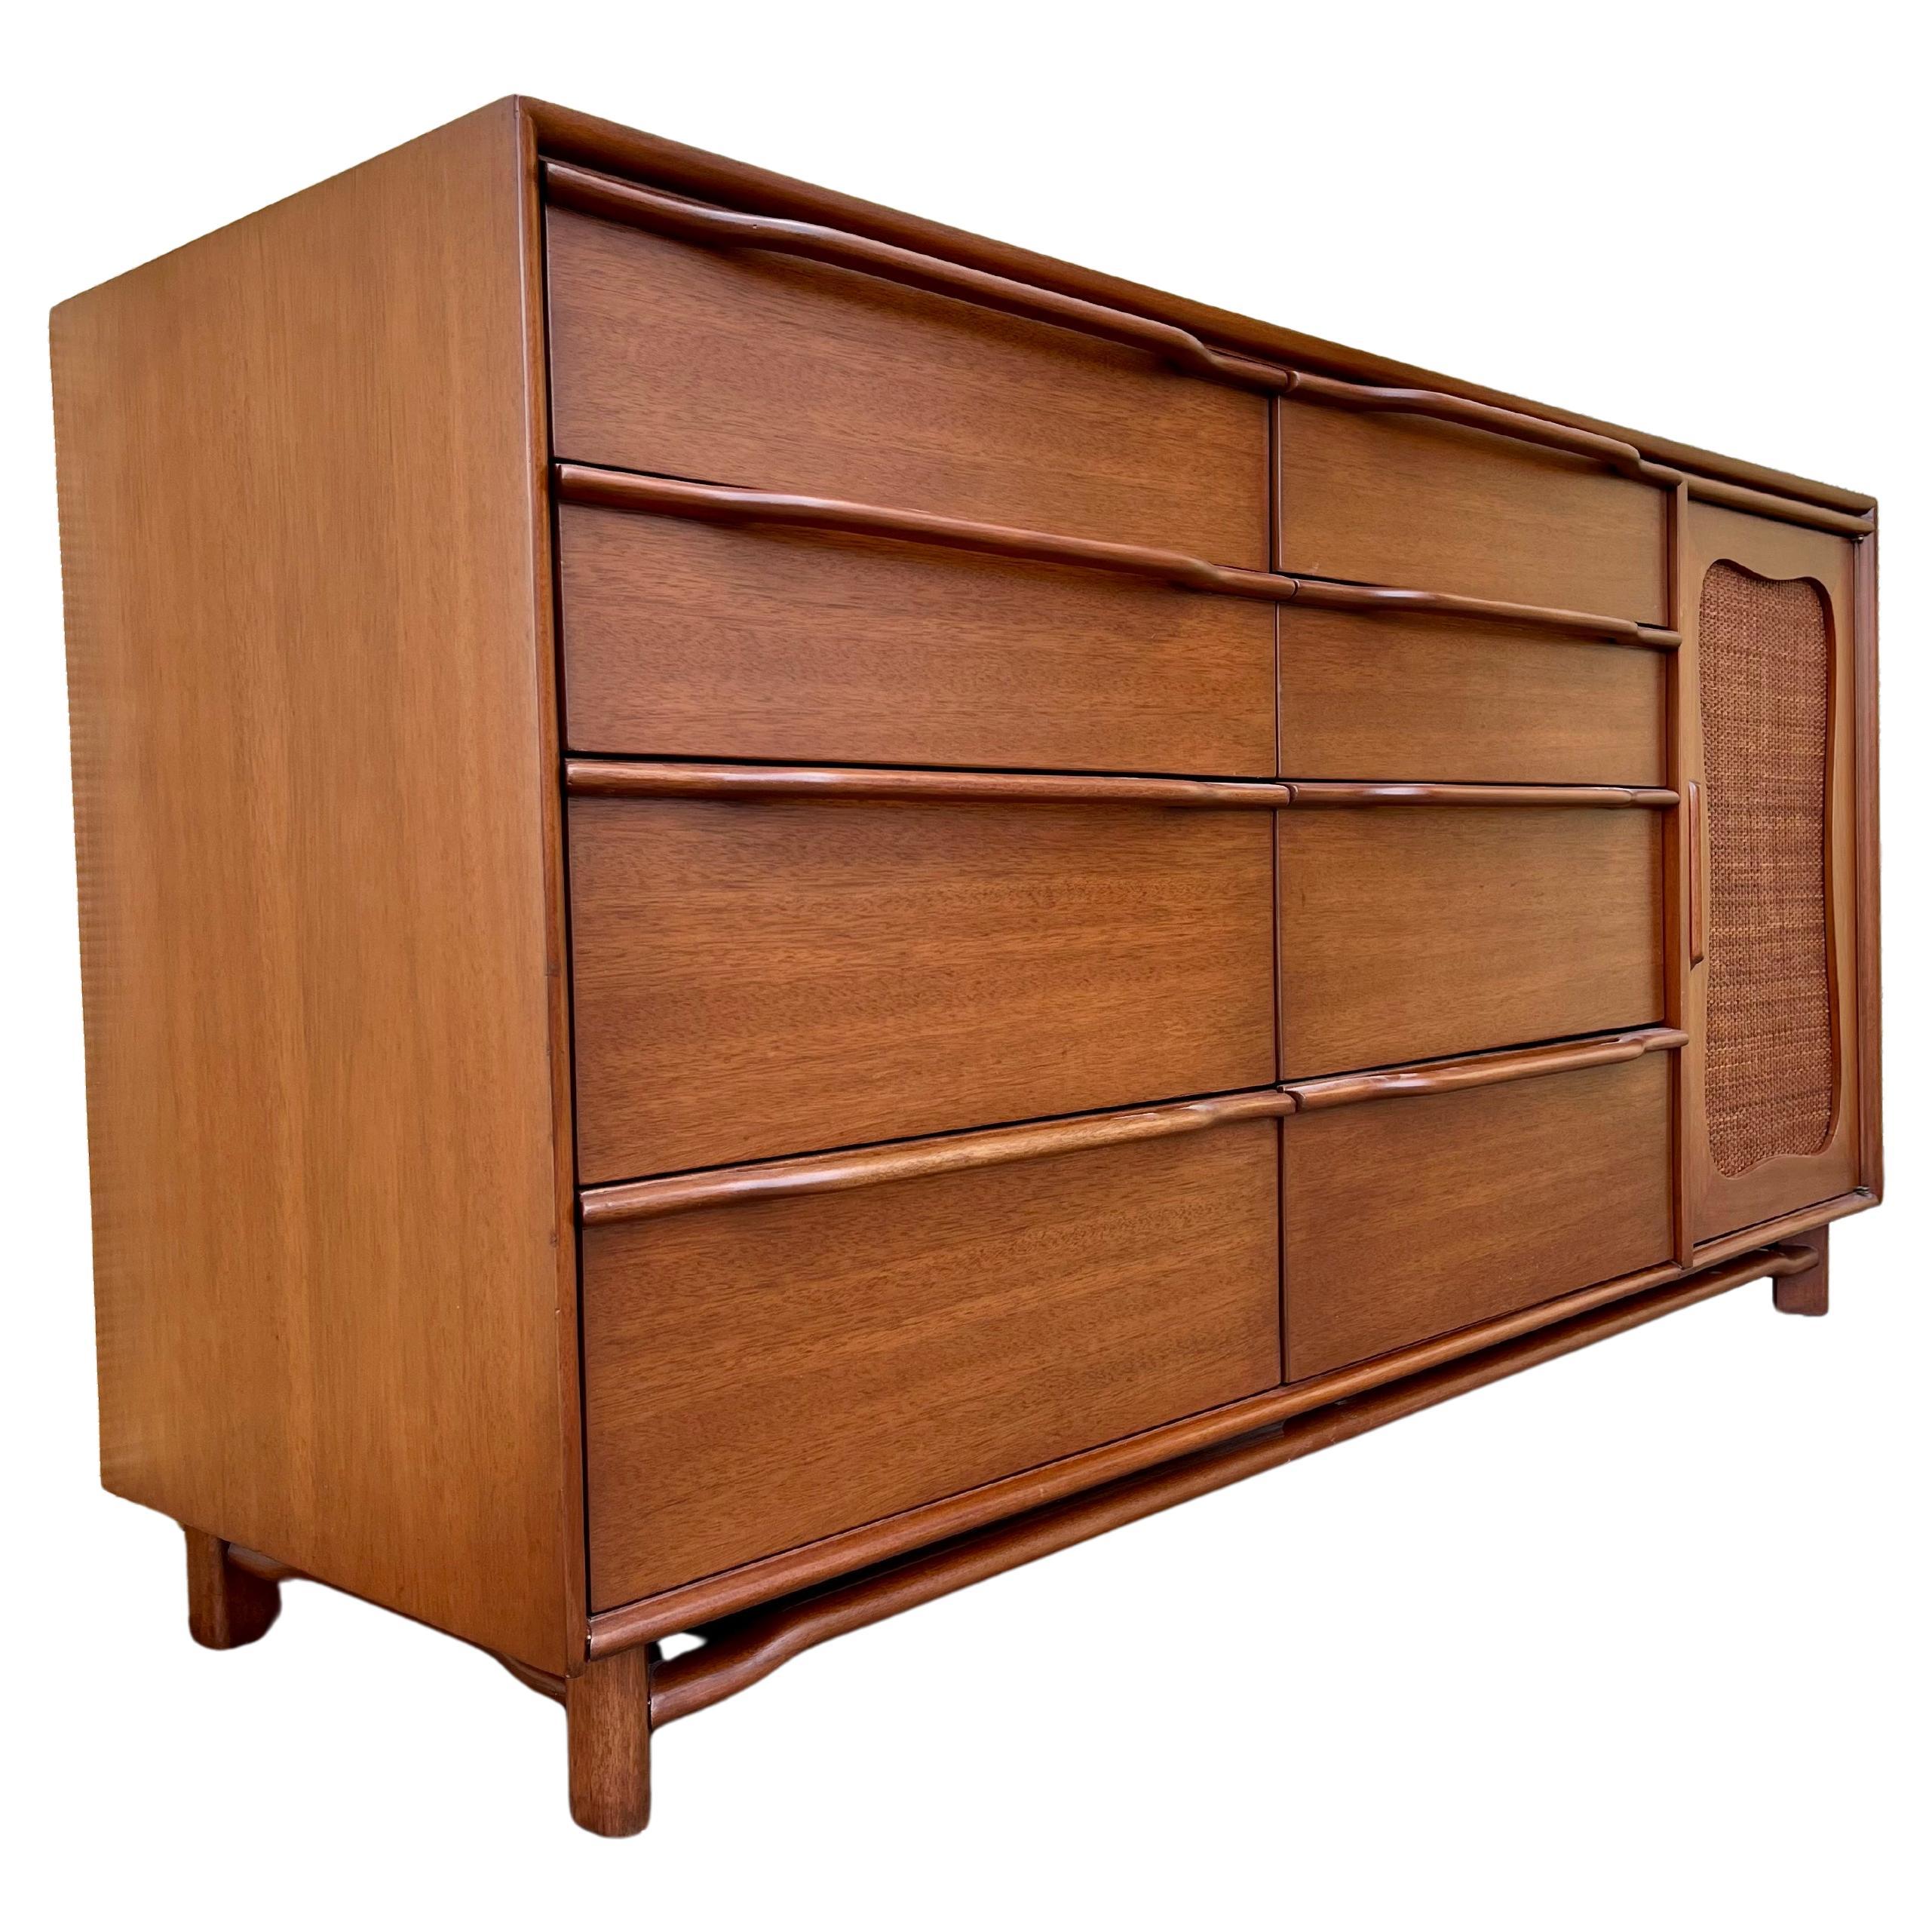 Fully Refinished Mid Century Modern Dresser by Hickory Manufacturing Company. For Sale